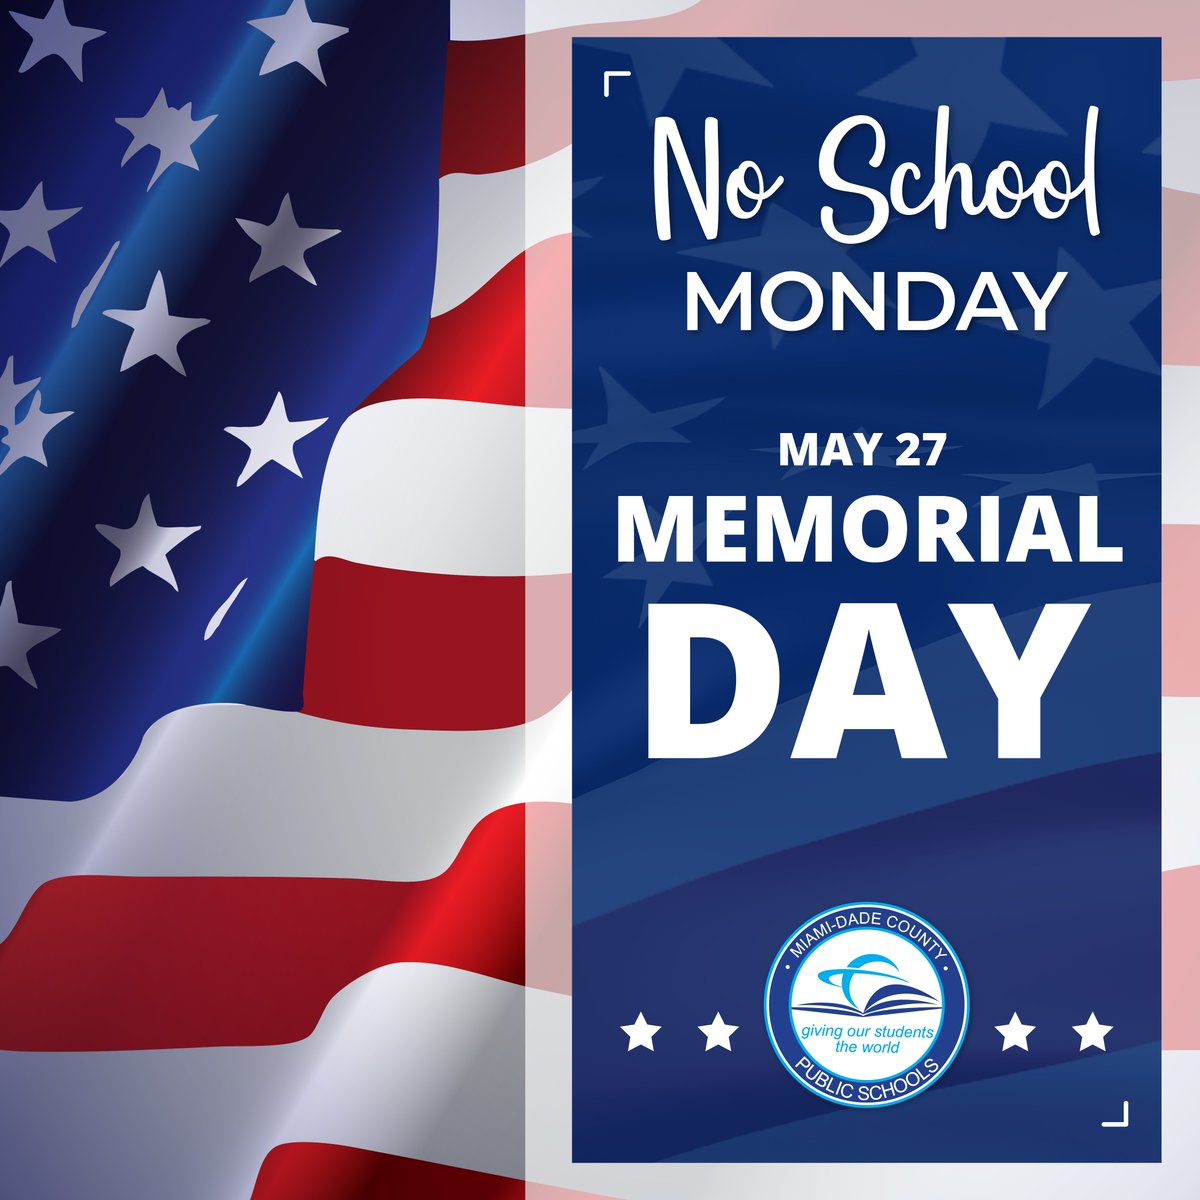 Reminder: All @MDCPS' schools as well as Region and District offices, will be closed Monday, May 27 in observance of Memorial Day. We will reopen Tuesday, May 28.